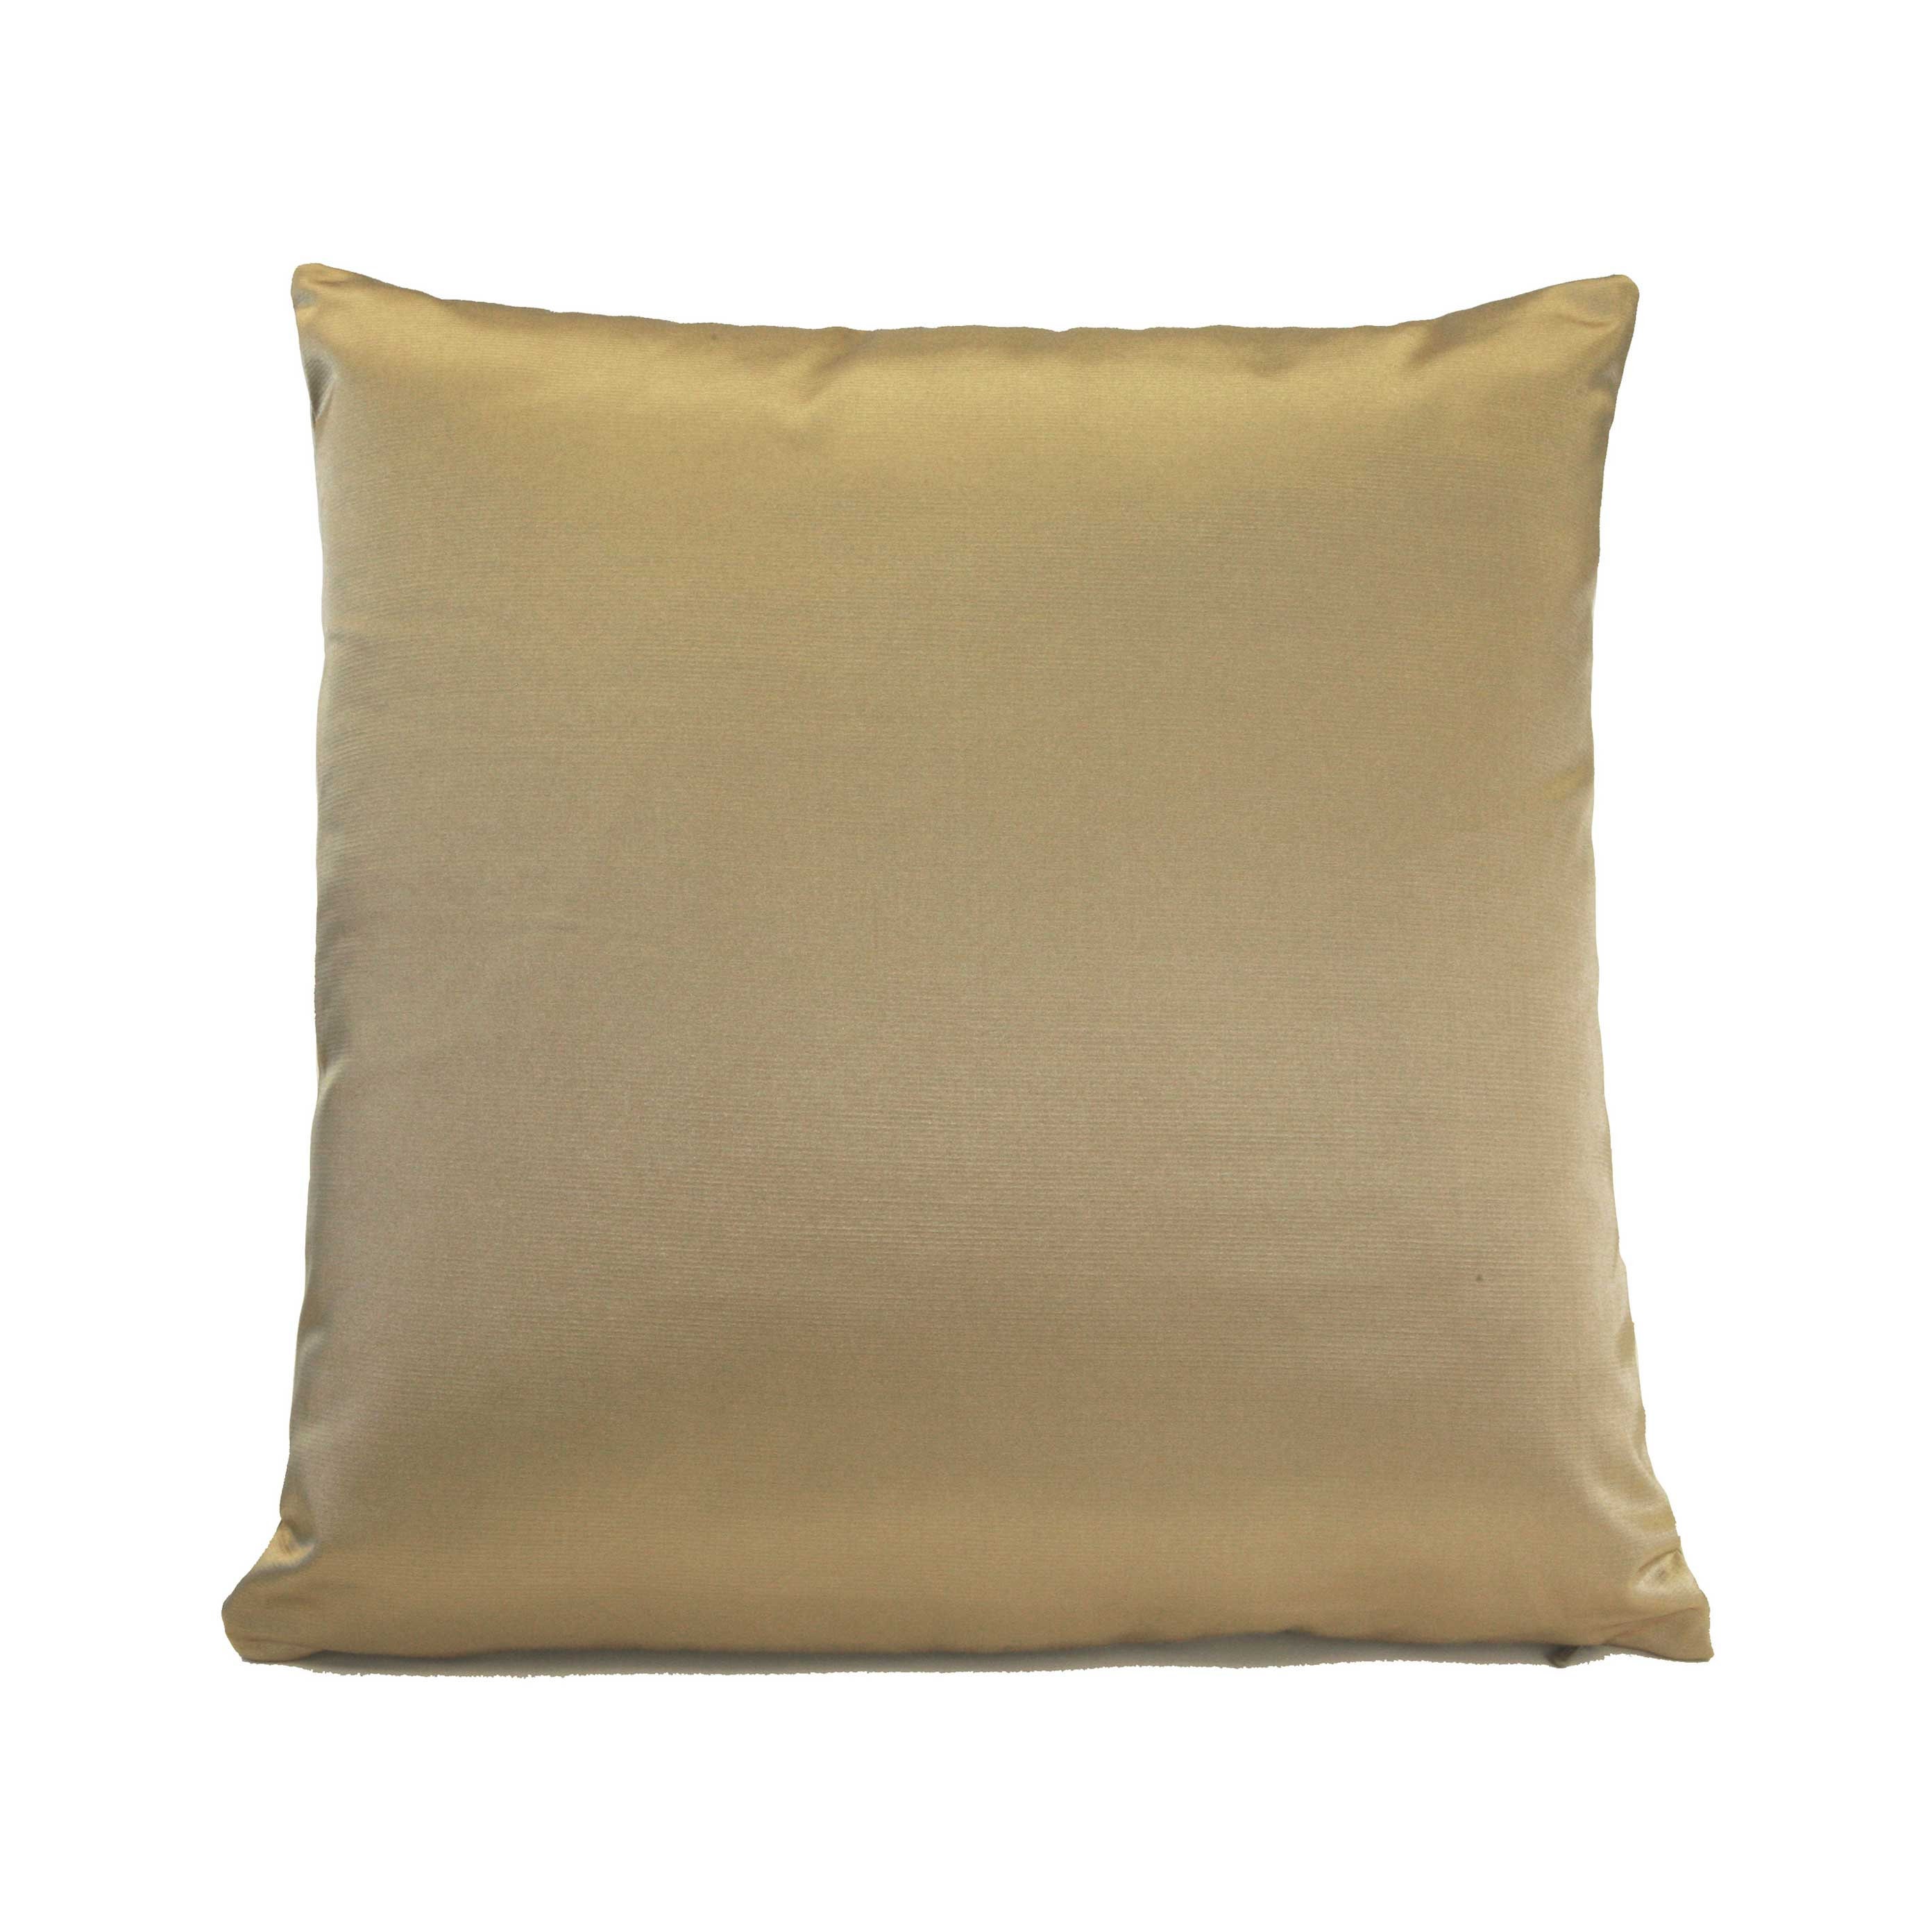 Tan/beige Decorative Throw Pillow Covers Cushion Covers - Etsy